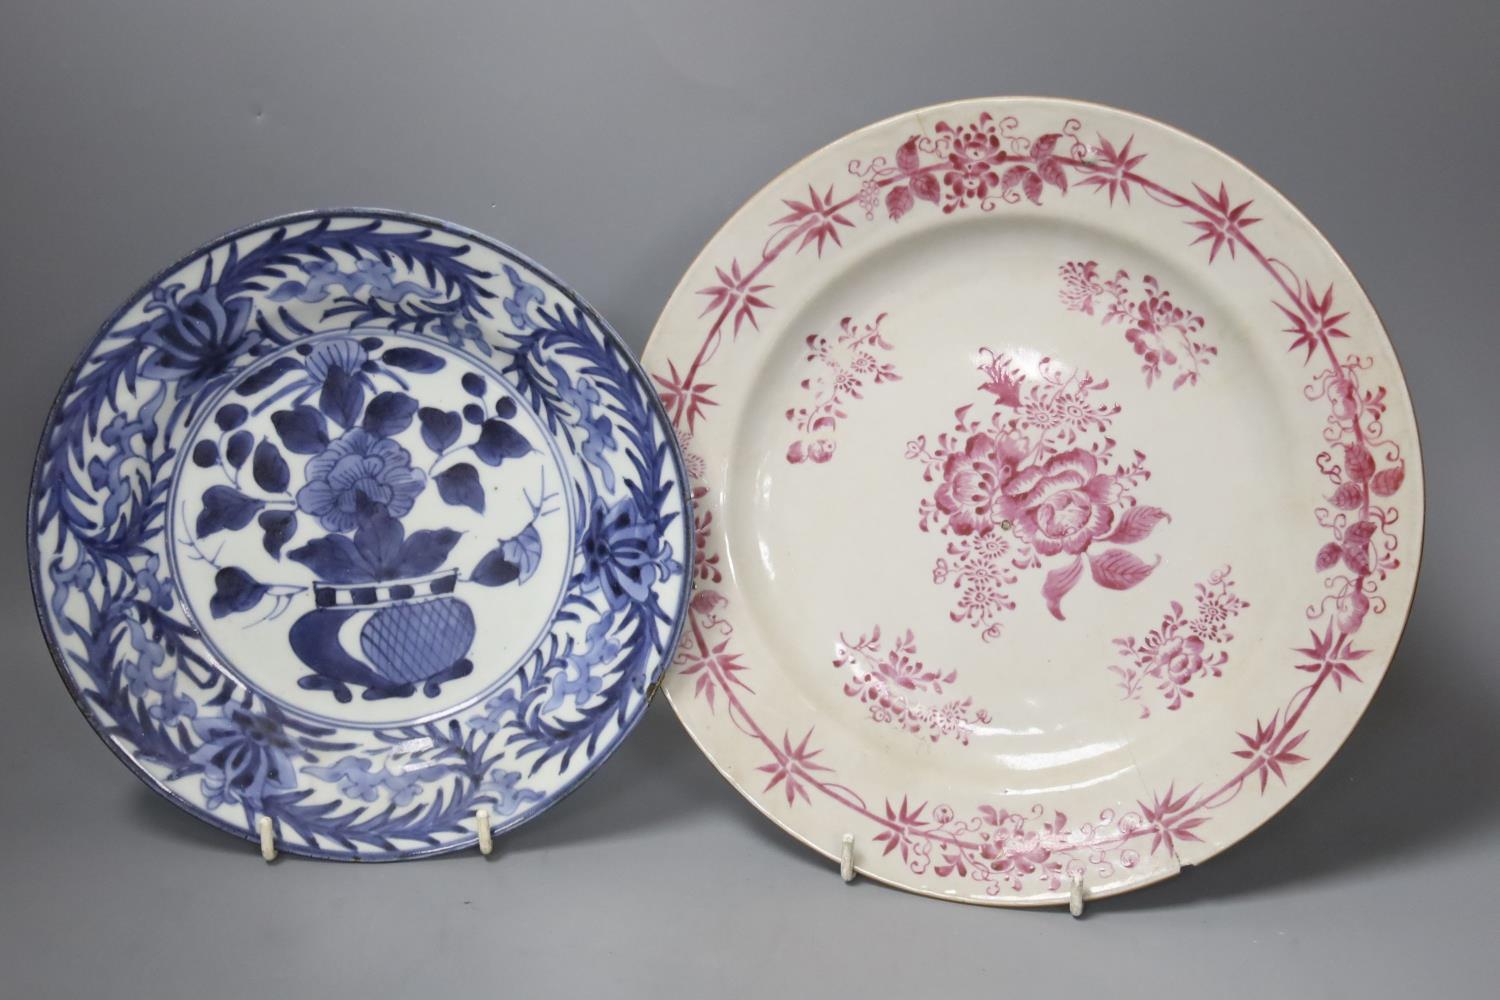 A group of Chinese porcelain, 18th/19th century and an 18th century Japanese Arita blue and white - Image 5 of 6